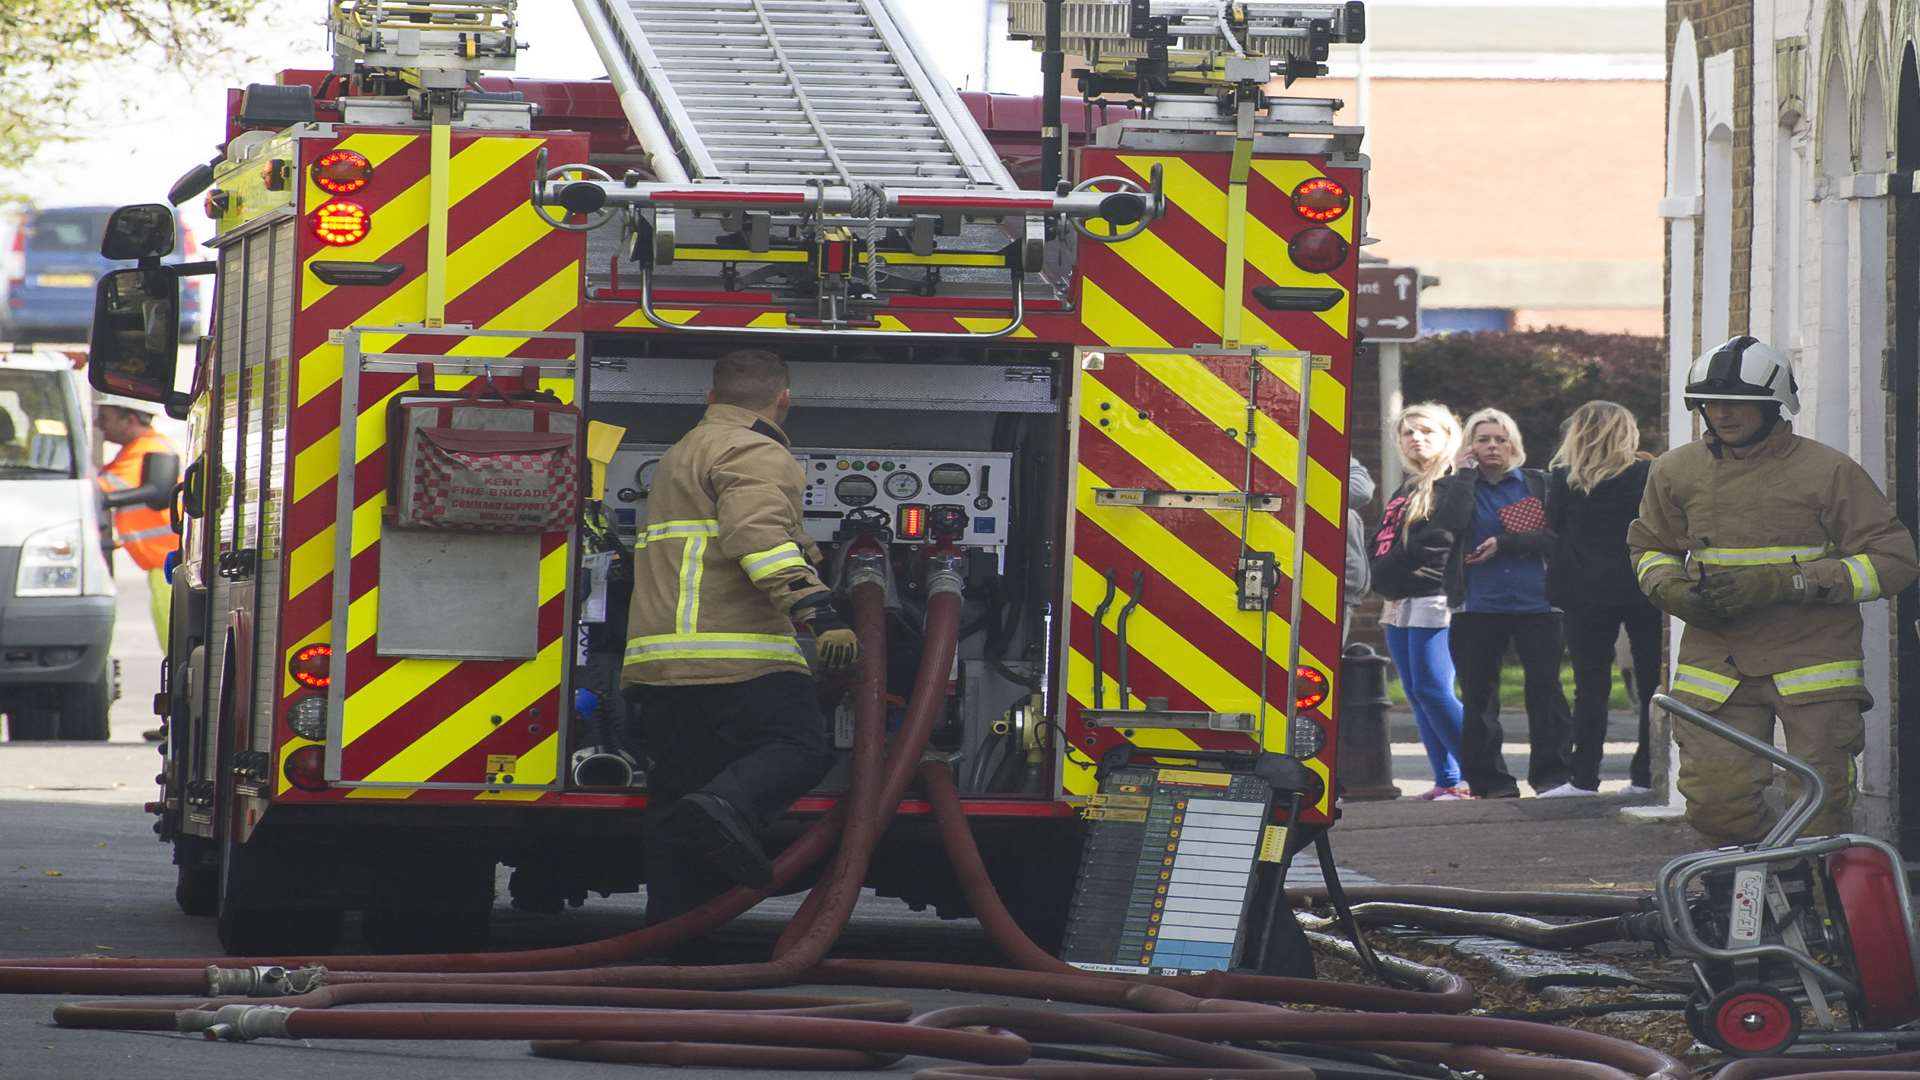 Fire crews were called to the scene. Library image.